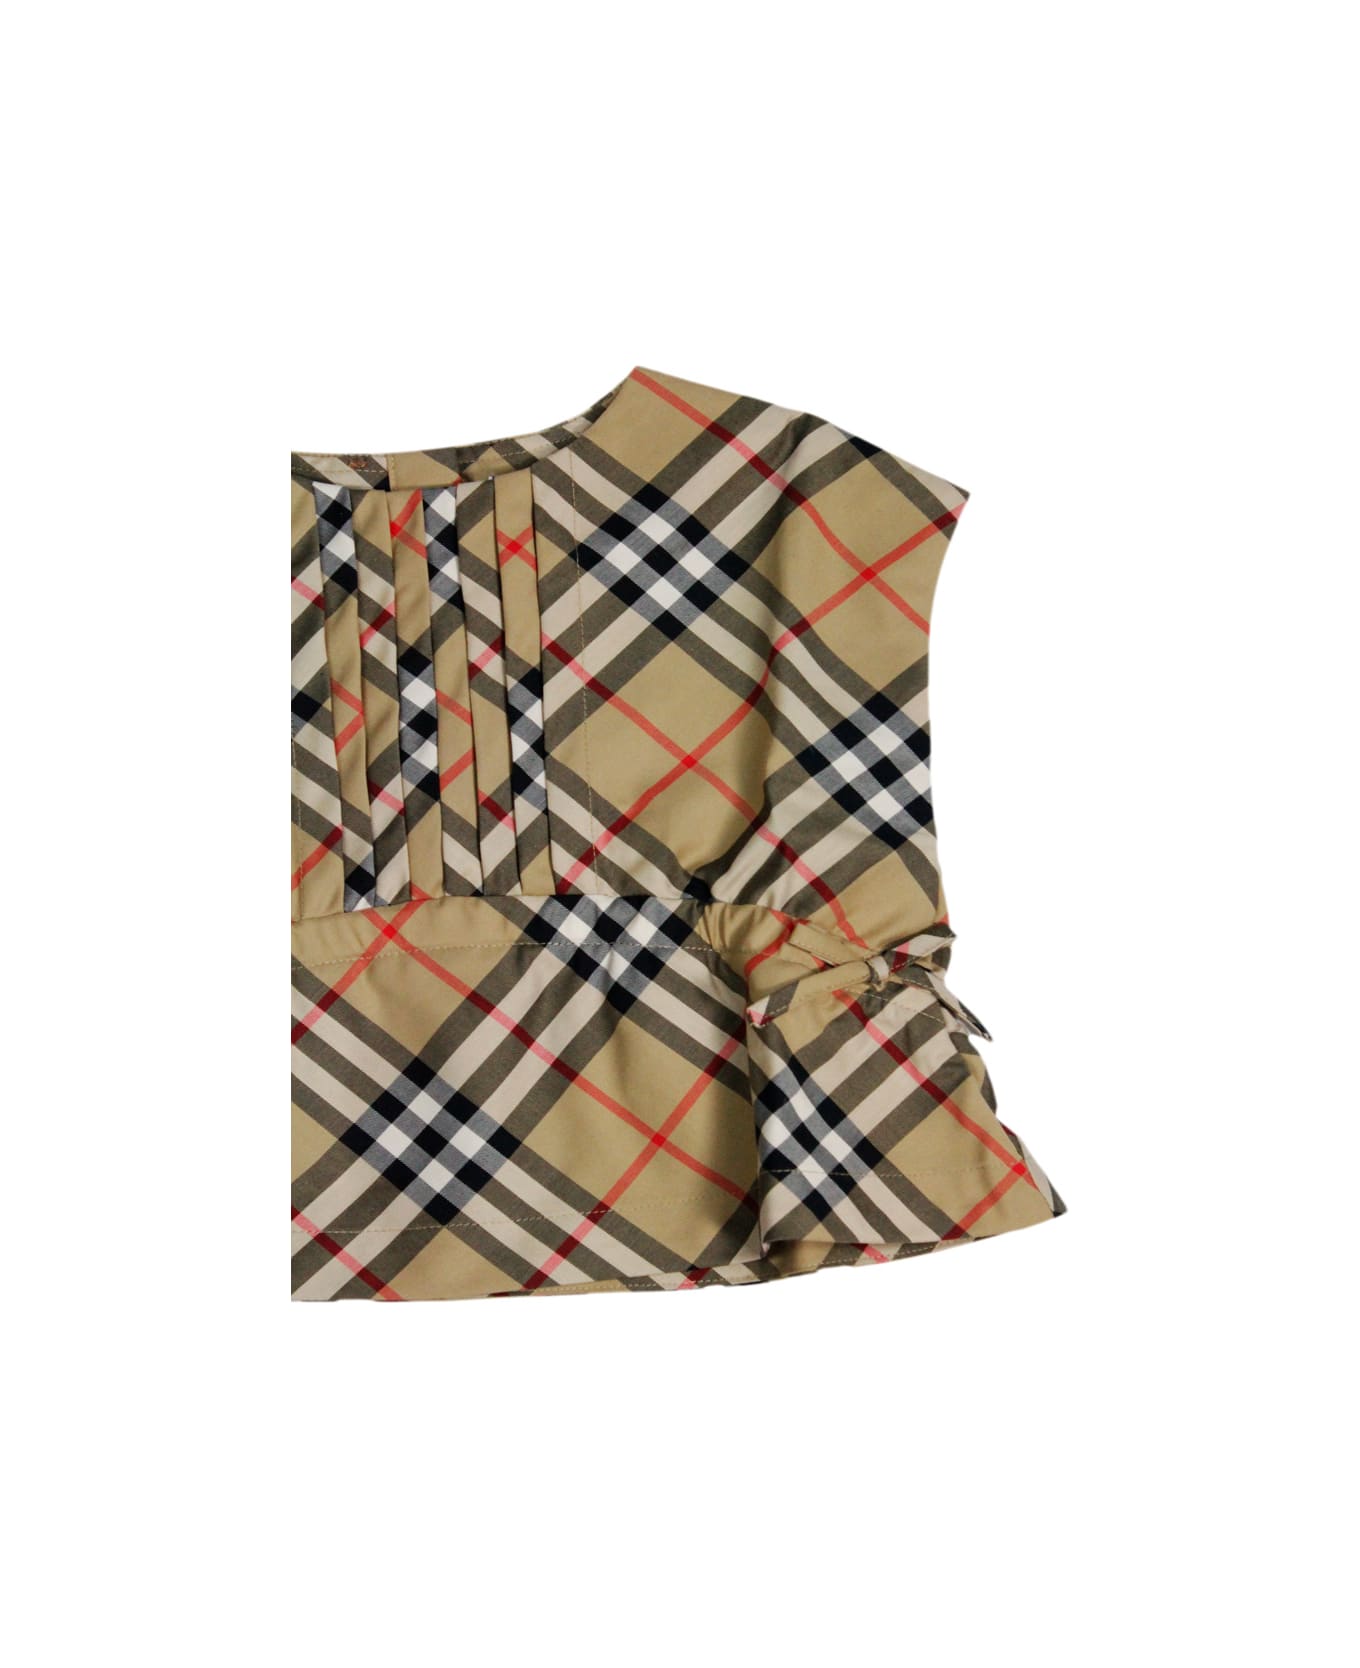 Burberry Sleeveless Crew-neck Shirt With Pleats On The Front In A Check Pattern - Beige